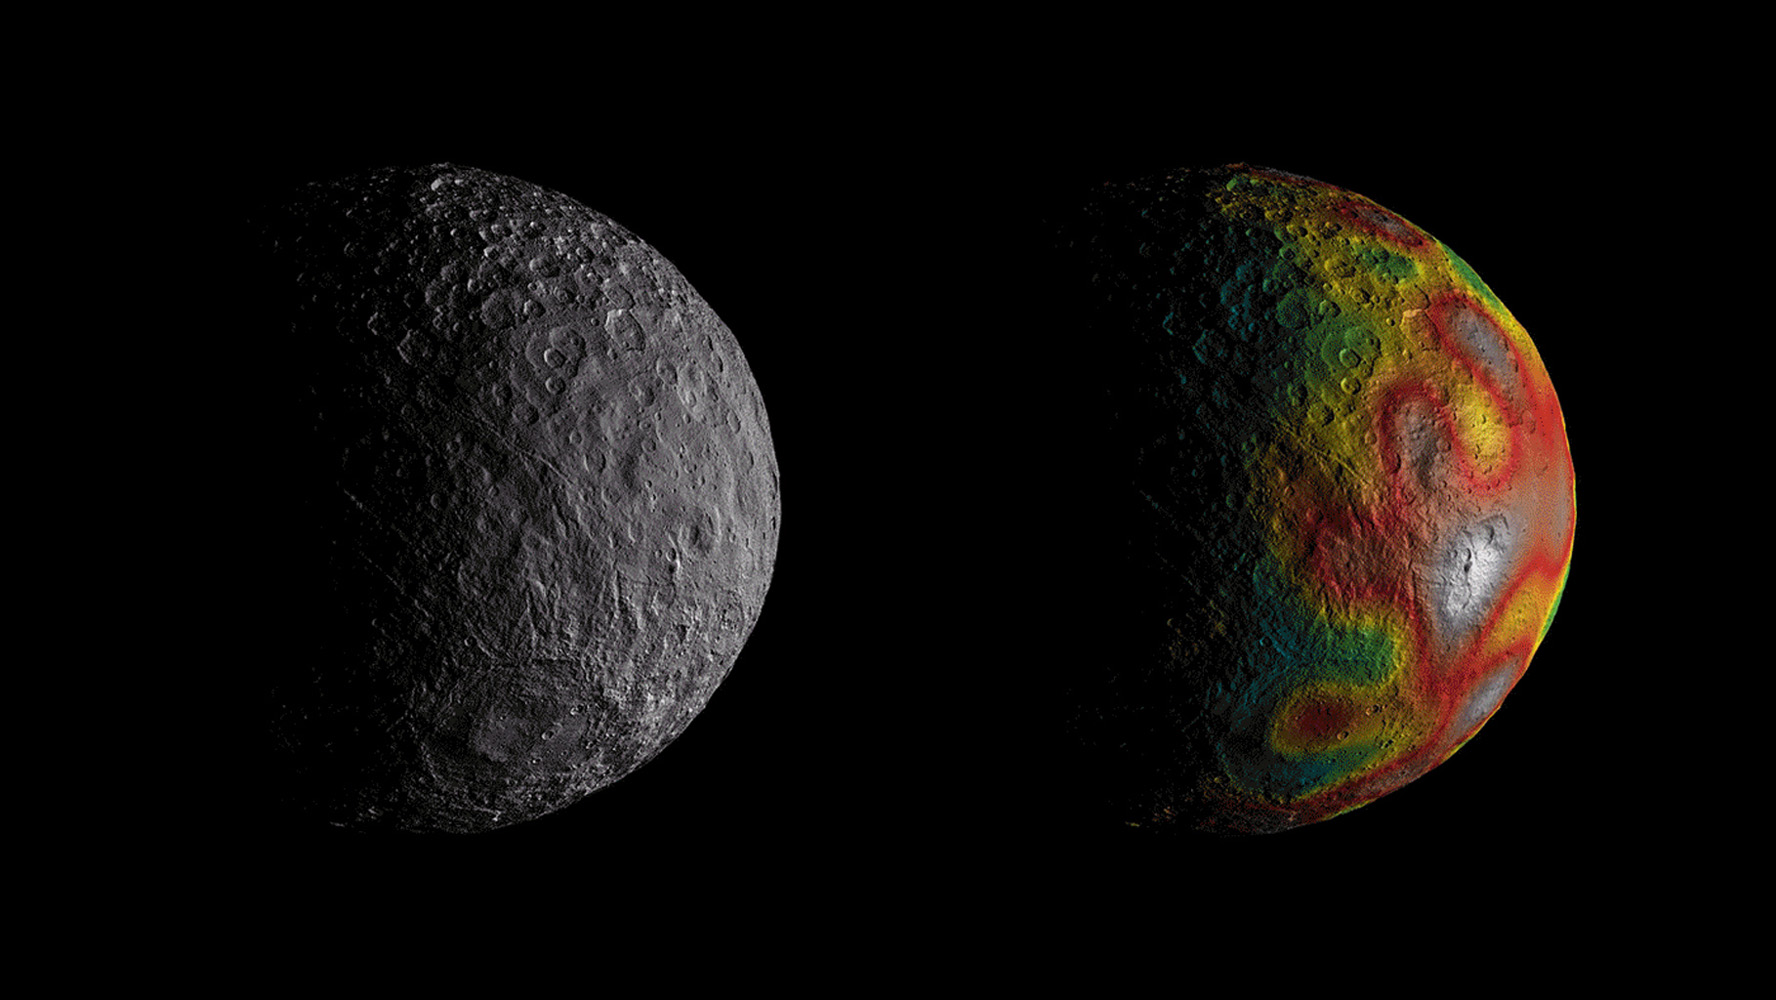 Clues to Ceres' Internal Structure